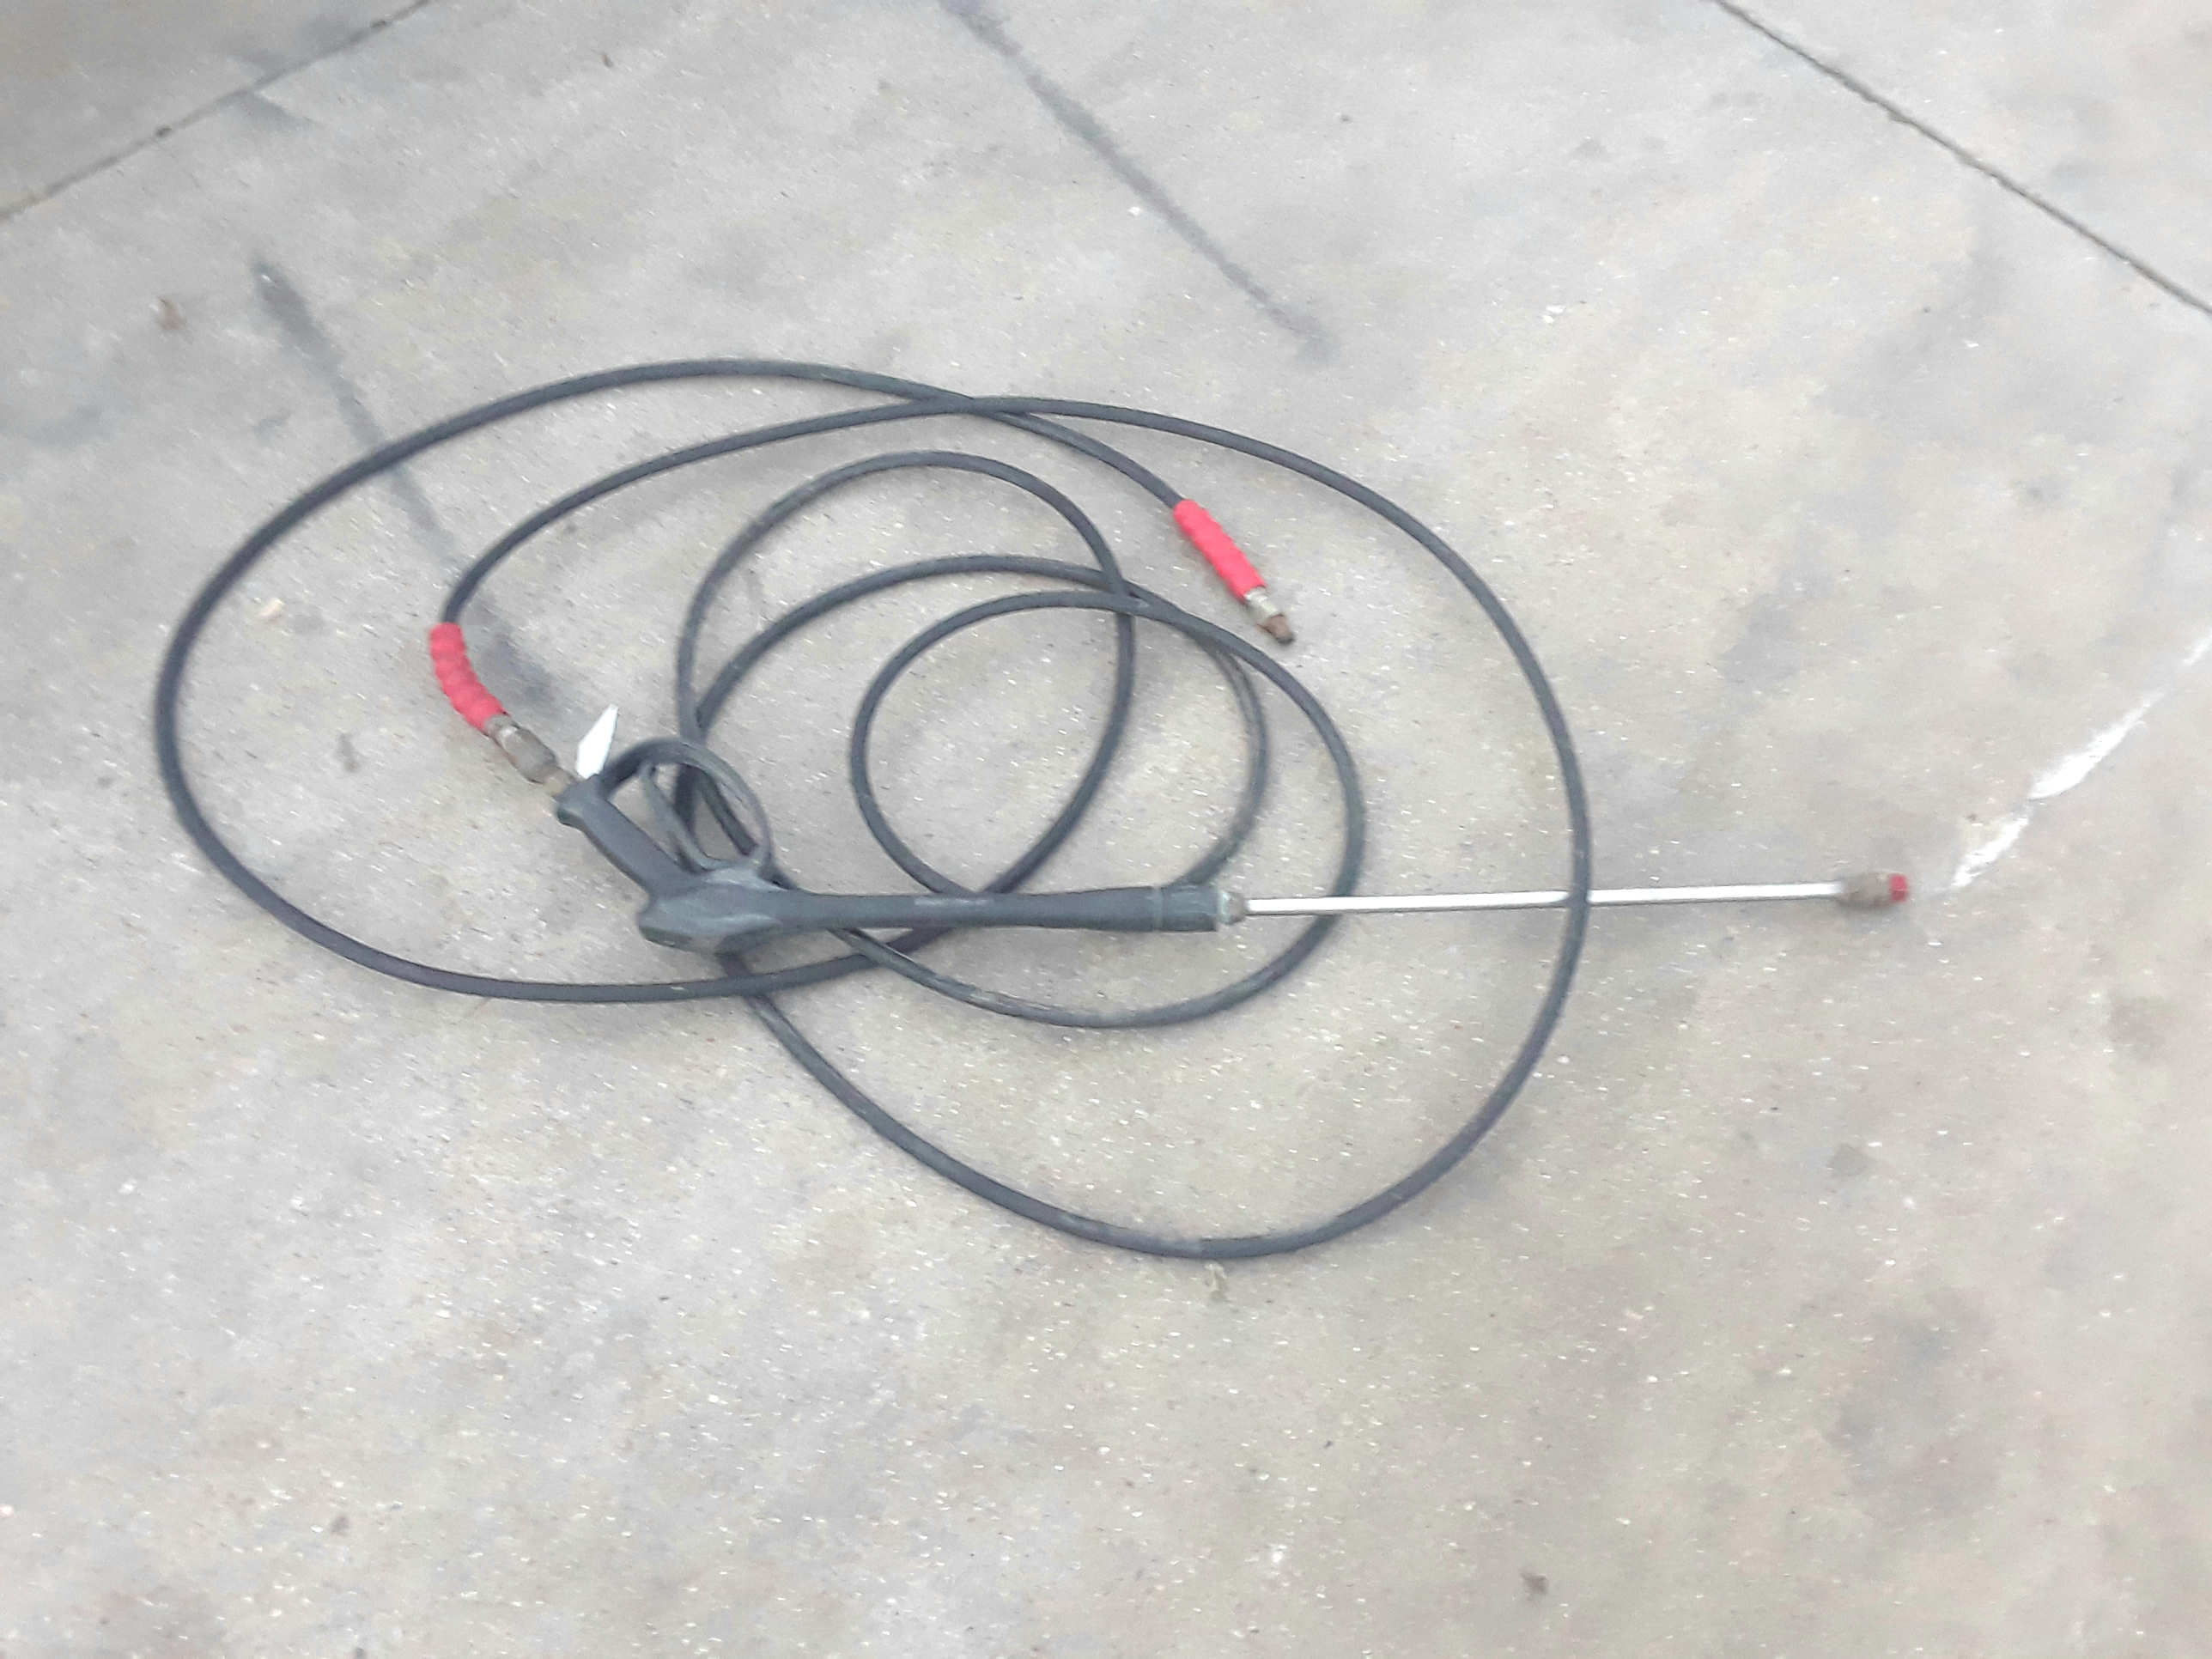 25 Ft High Pressure Hose with quick connects D22693 Honda pressure washer exha2425-wk-1